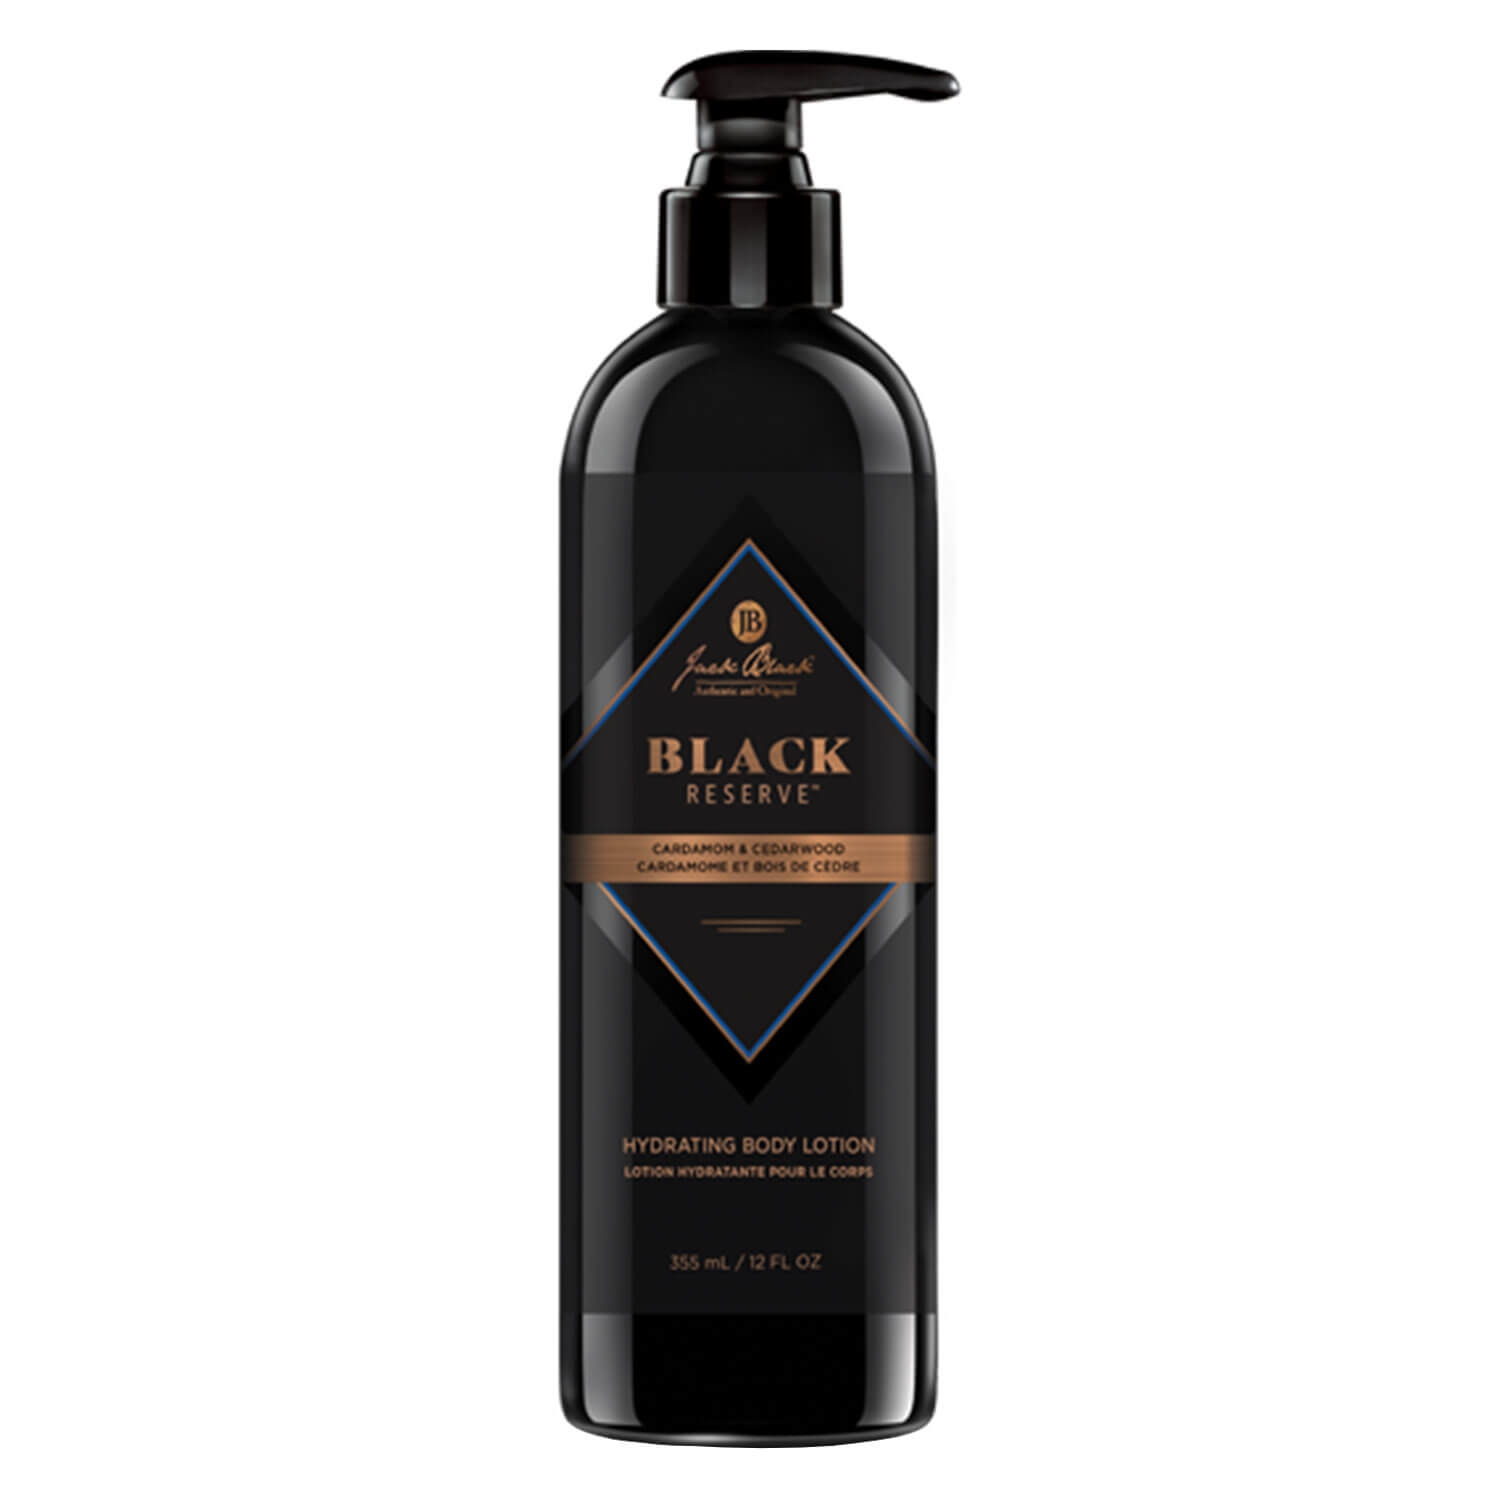 Product image from Black Reserve - Hydrating Body Lotion